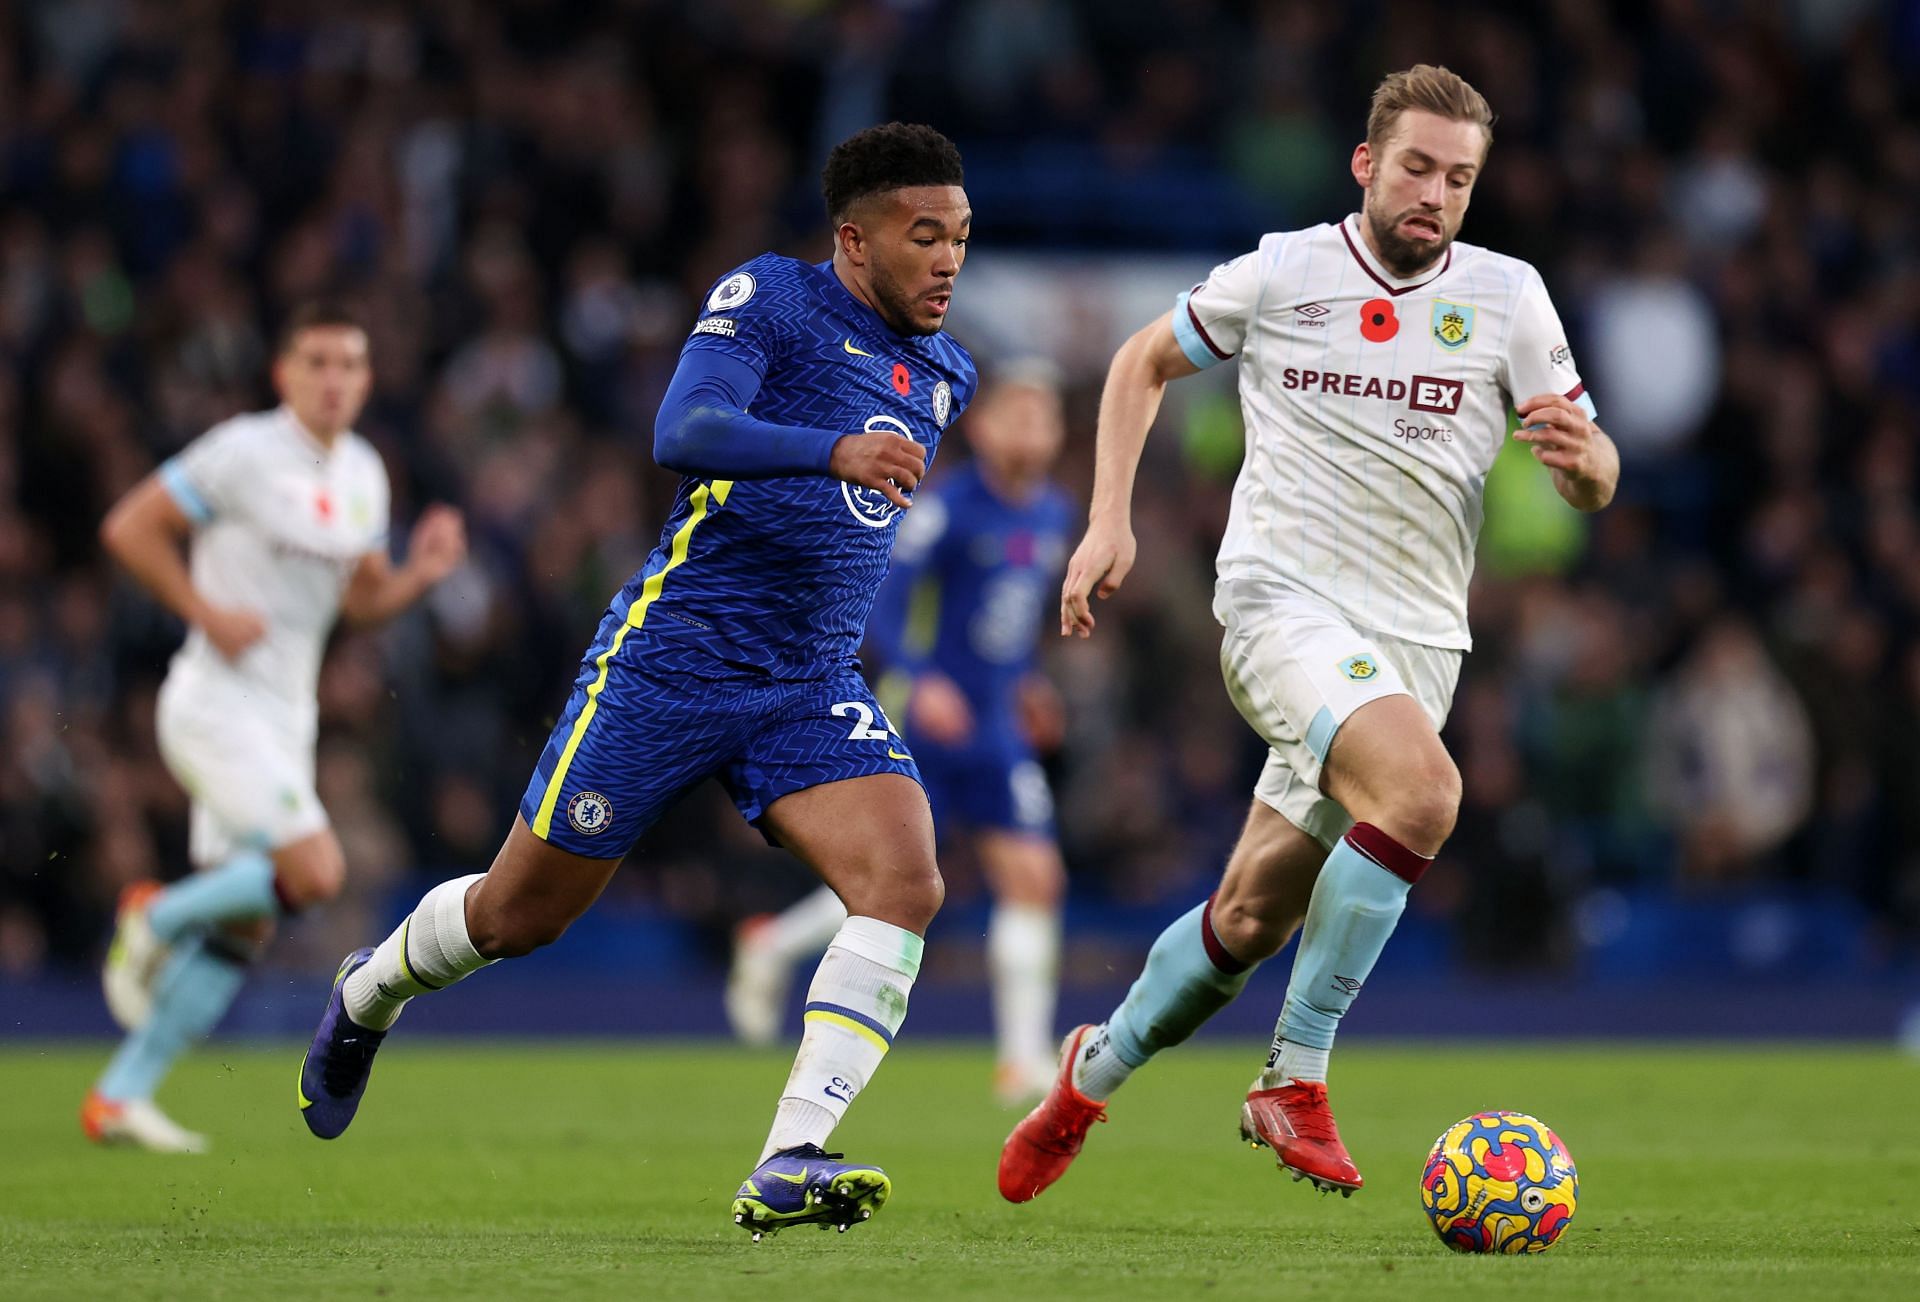 Chelsea and Burnley played out a 1-1 draw in their Premier League clash on Saturday